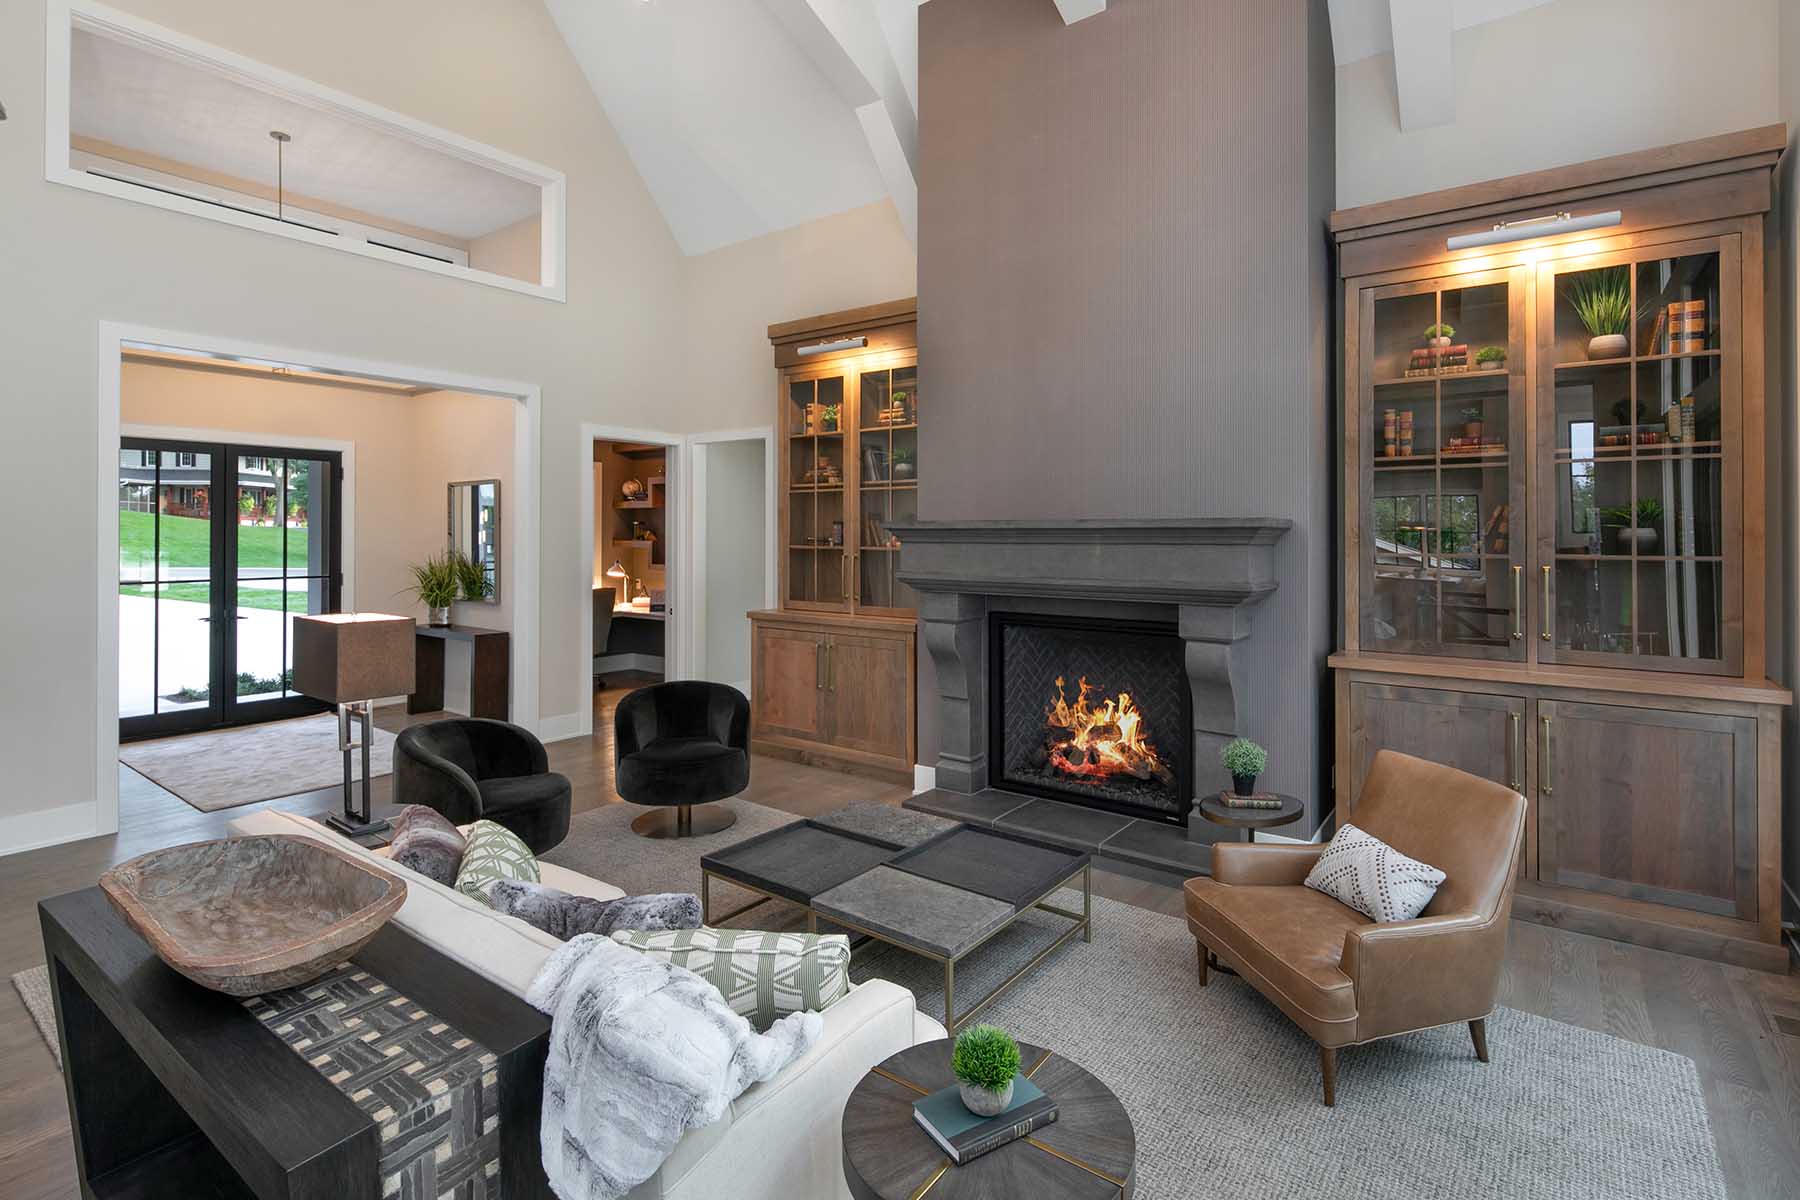 A large living room with a fireplace.